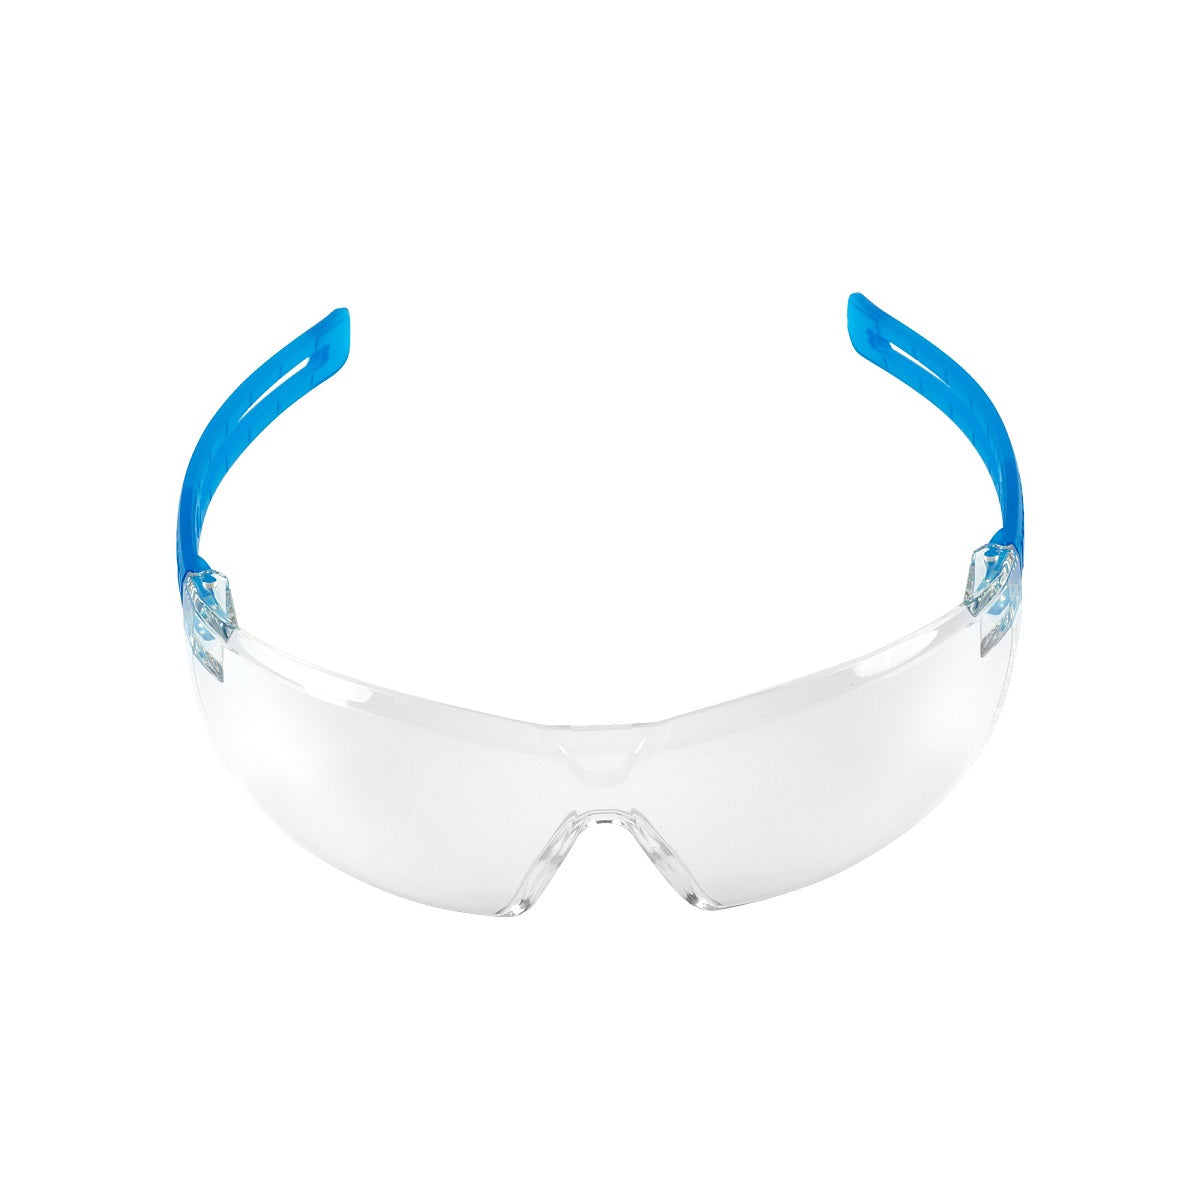 uvex x-fit Safety Glasses. Light weight of only 23 g. protexU